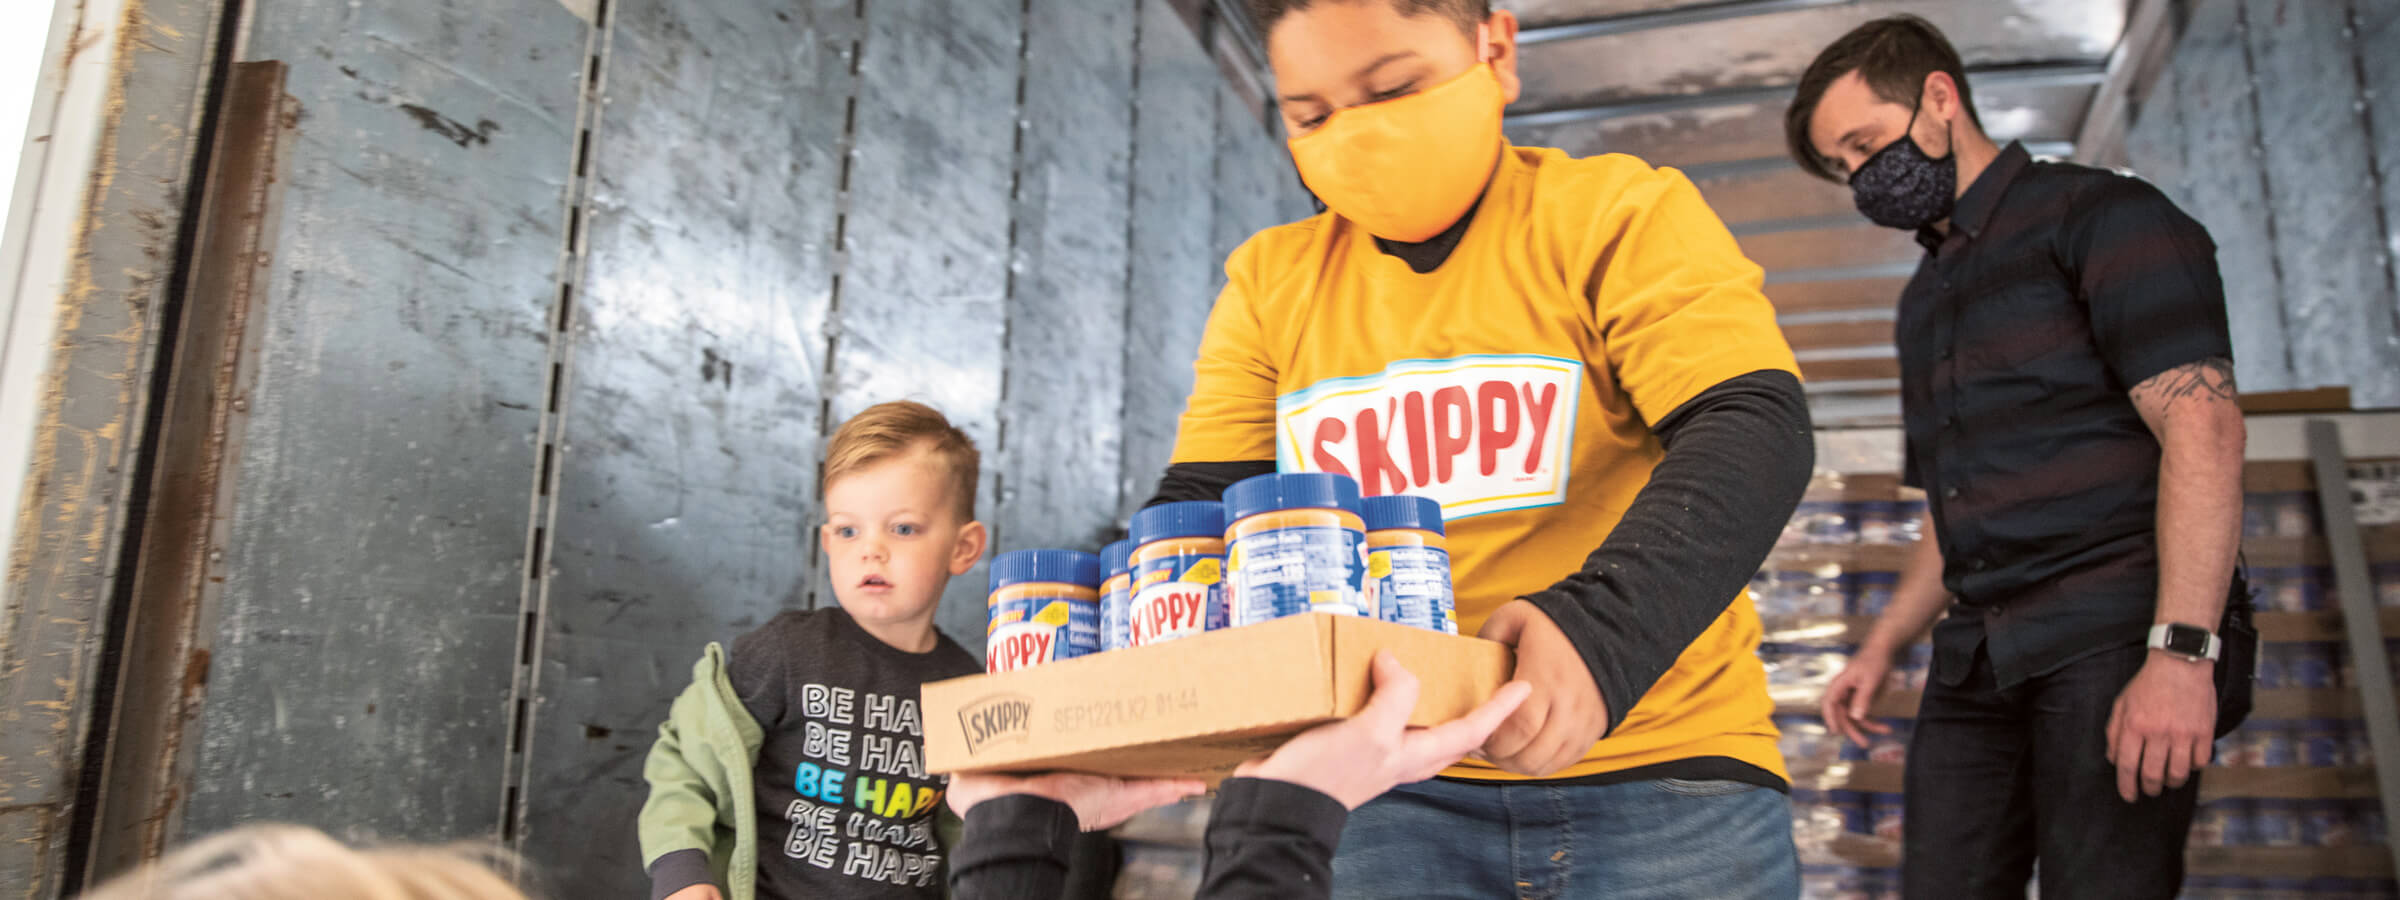 unloading Skippy products from a food donation truck